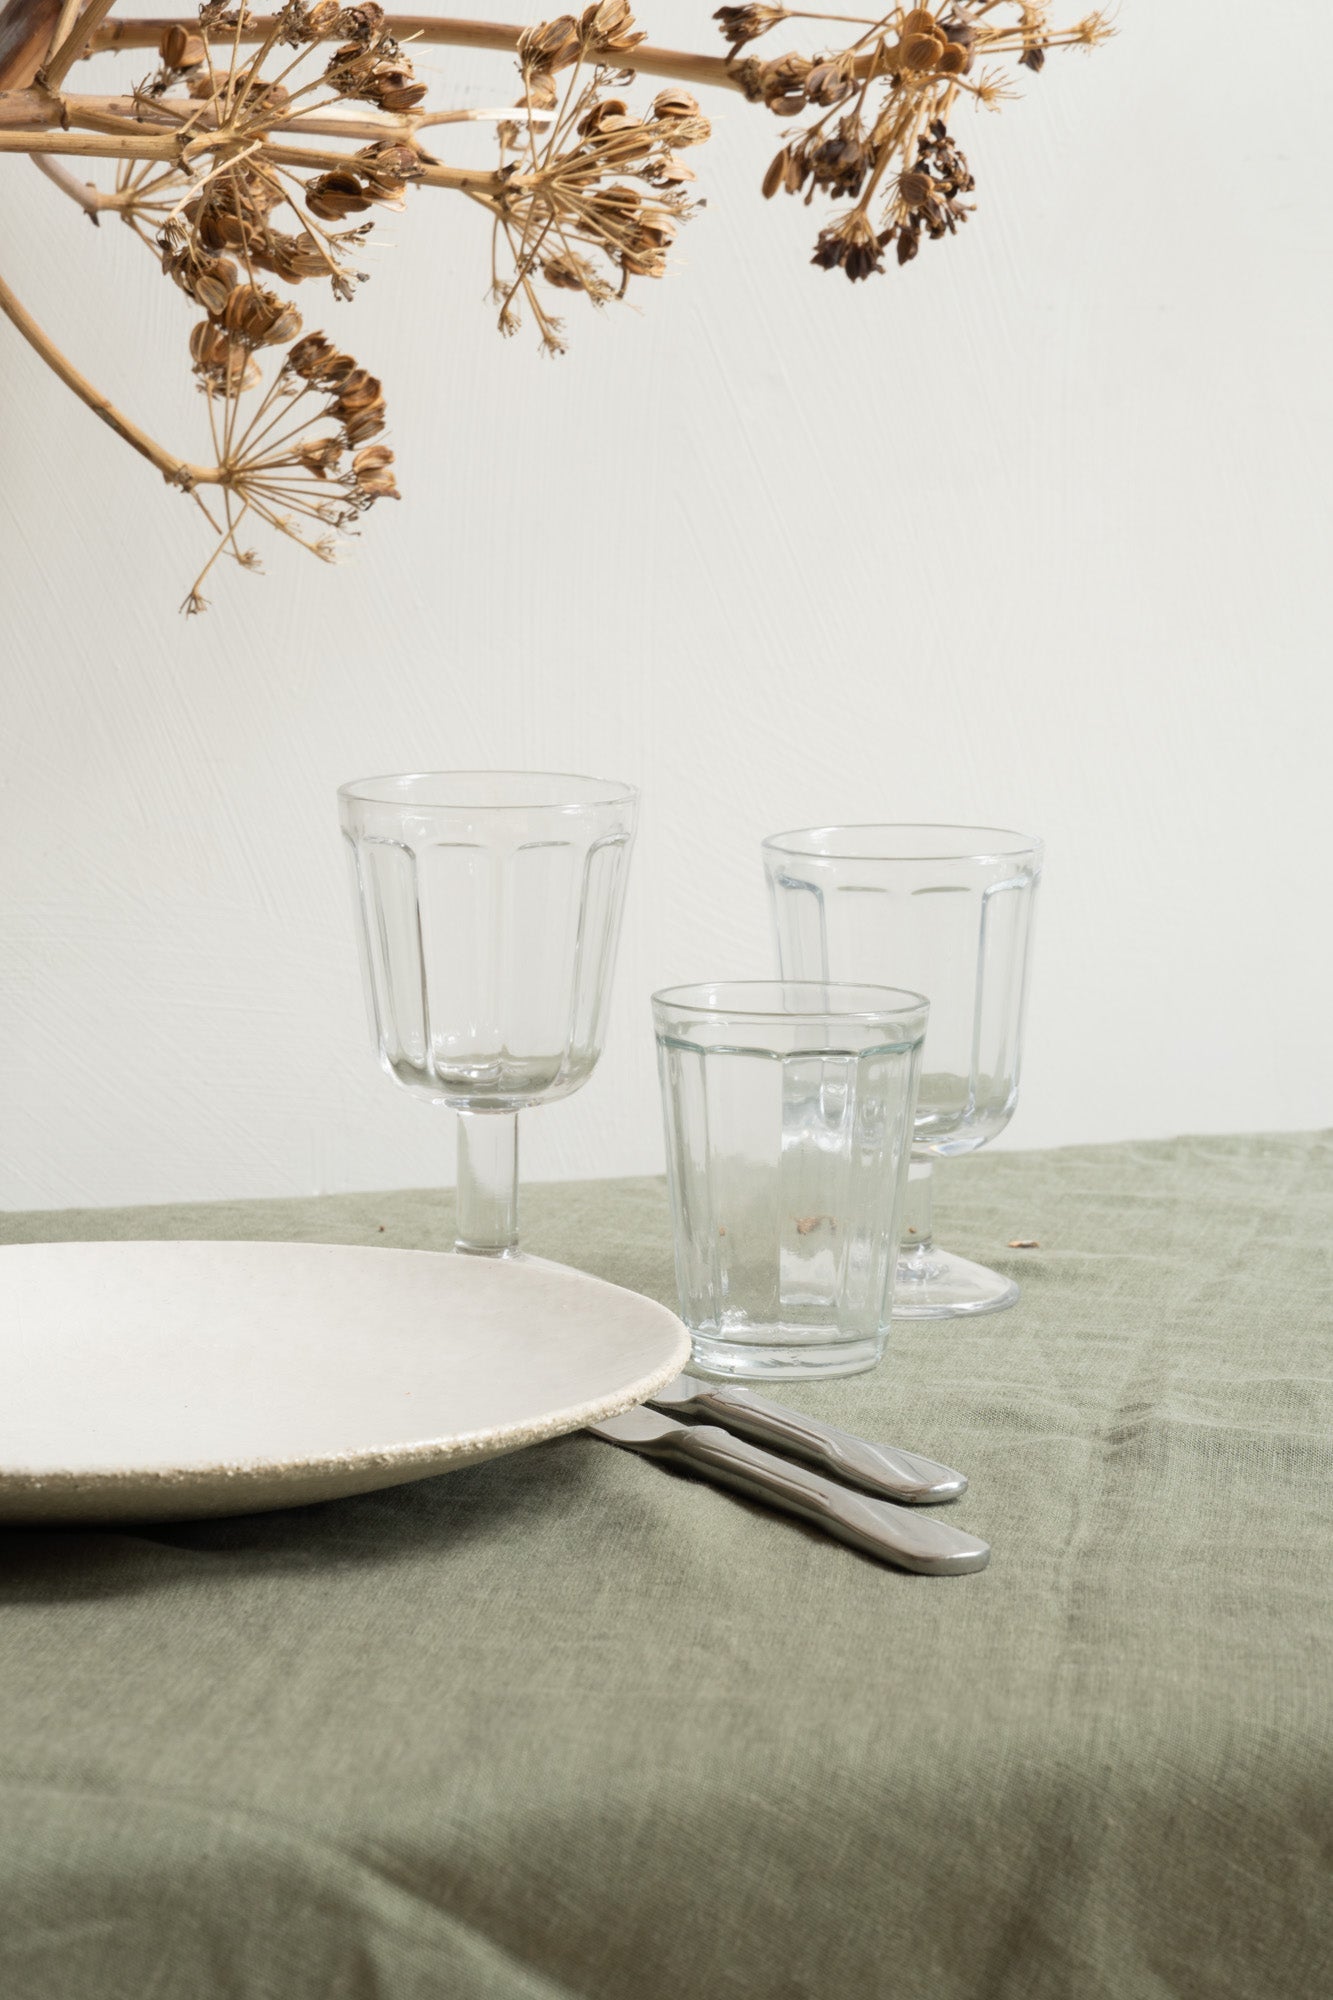 How to set the table and order the glasses?